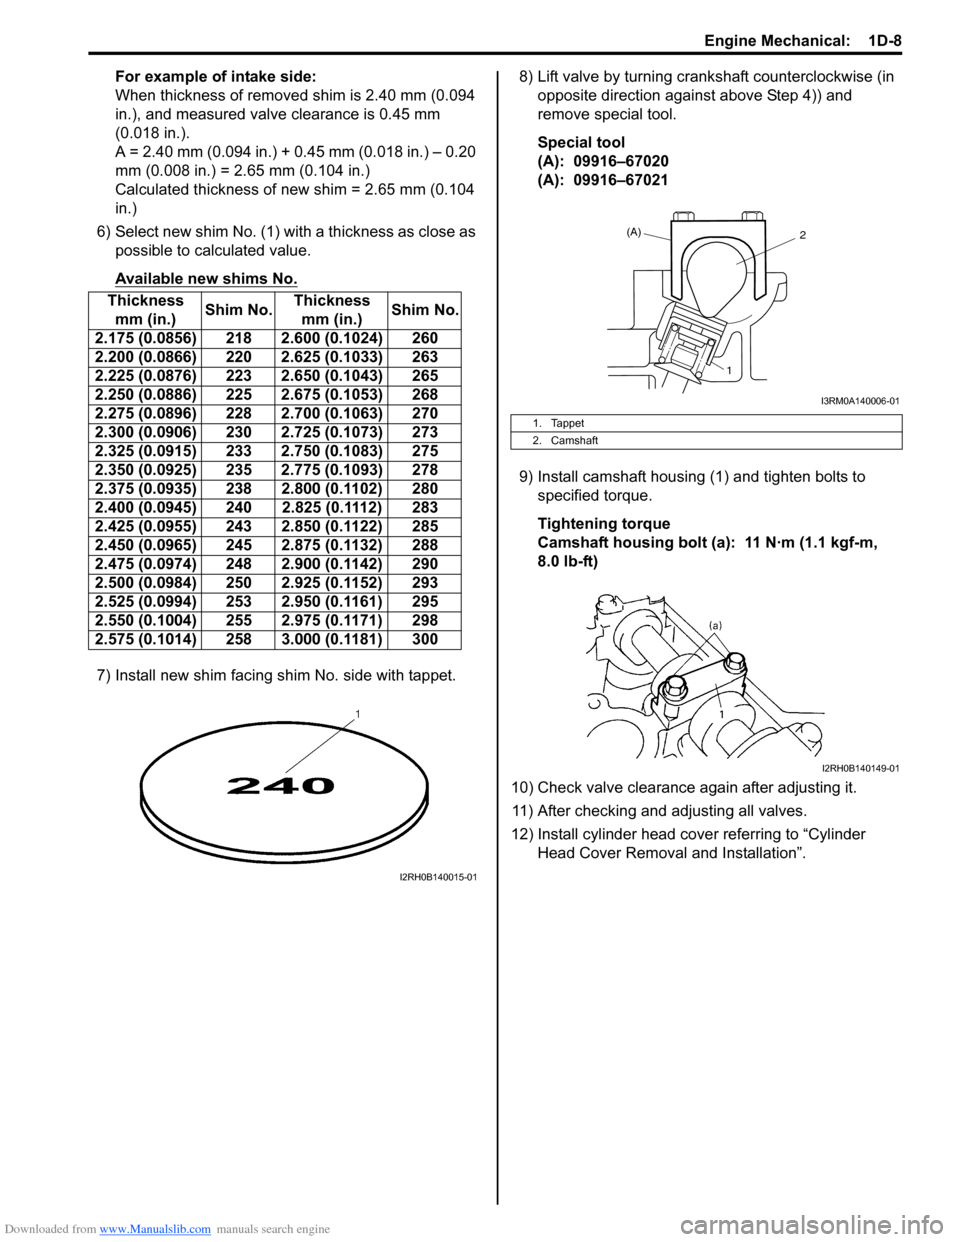 SUZUKI SWIFT 2008 2.G Service Workshop Manual Downloaded from www.Manualslib.com manuals search engine Engine Mechanical:  1D-8
For example of intake side:
When thickness of removed shim is 2.40 mm (0.094 
in.), and measured valve clearance is 0.